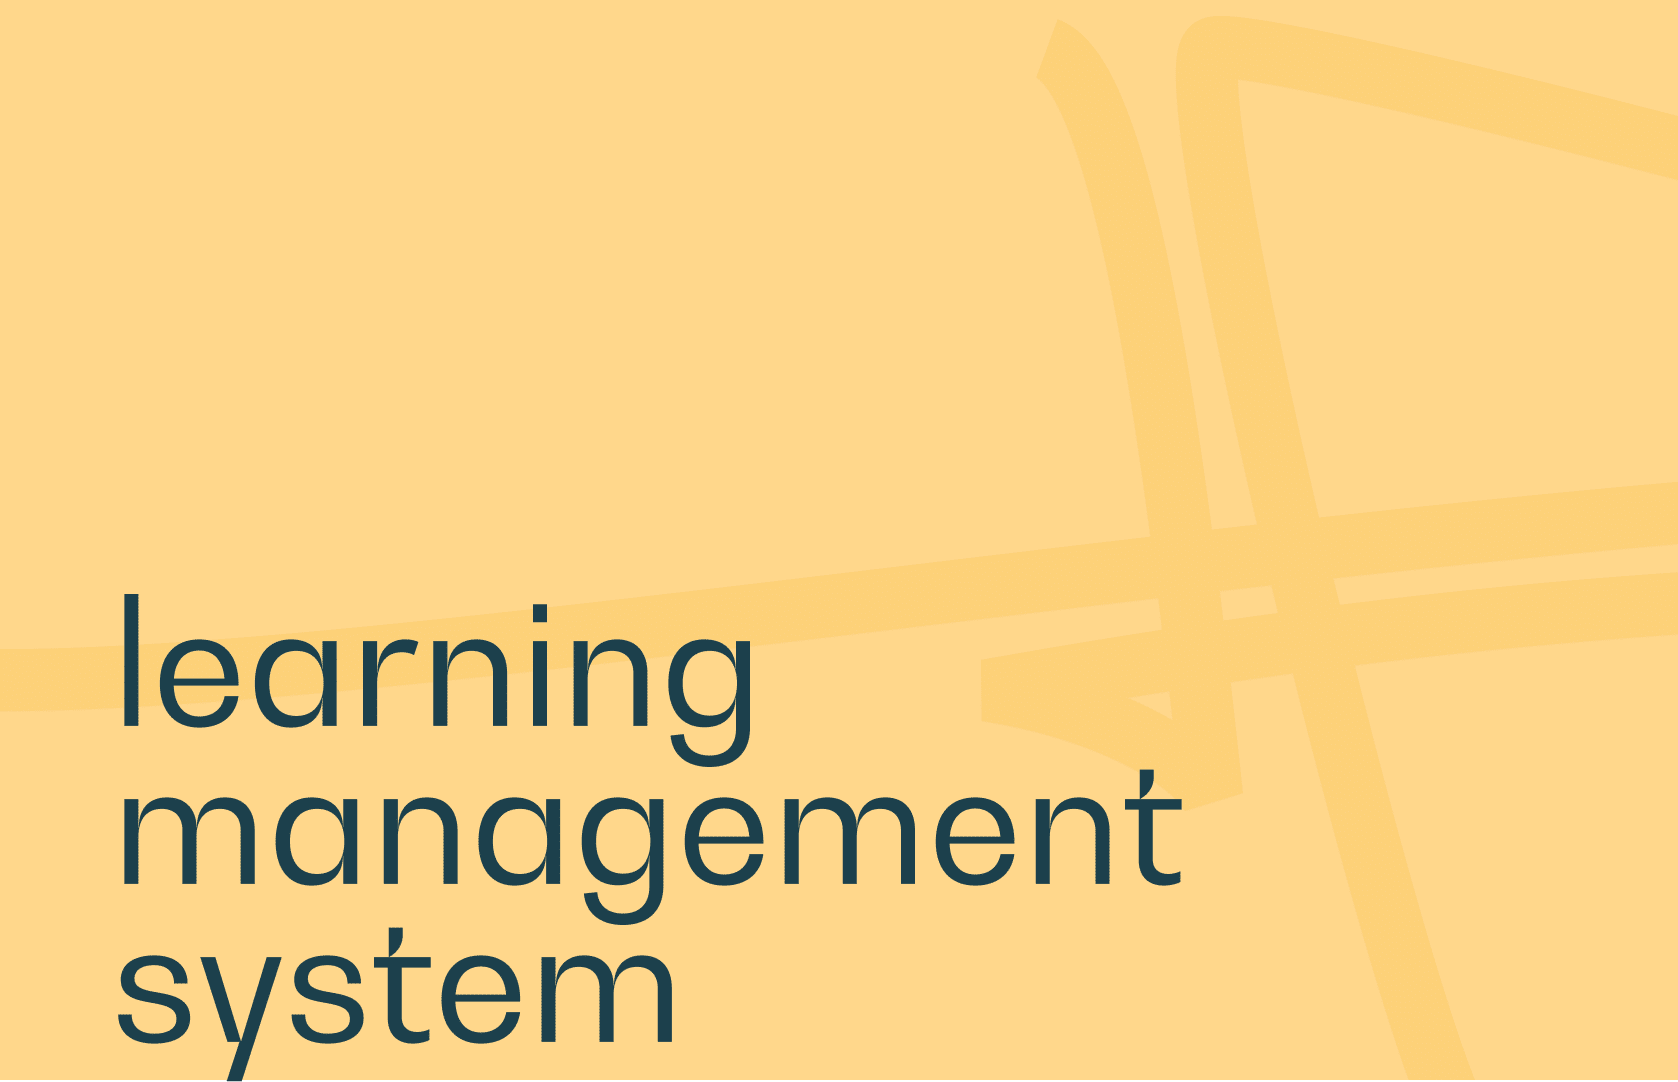 The learning management system (LMS) is a software package for managing an e-learning platform. It has two main functions: learning and management.